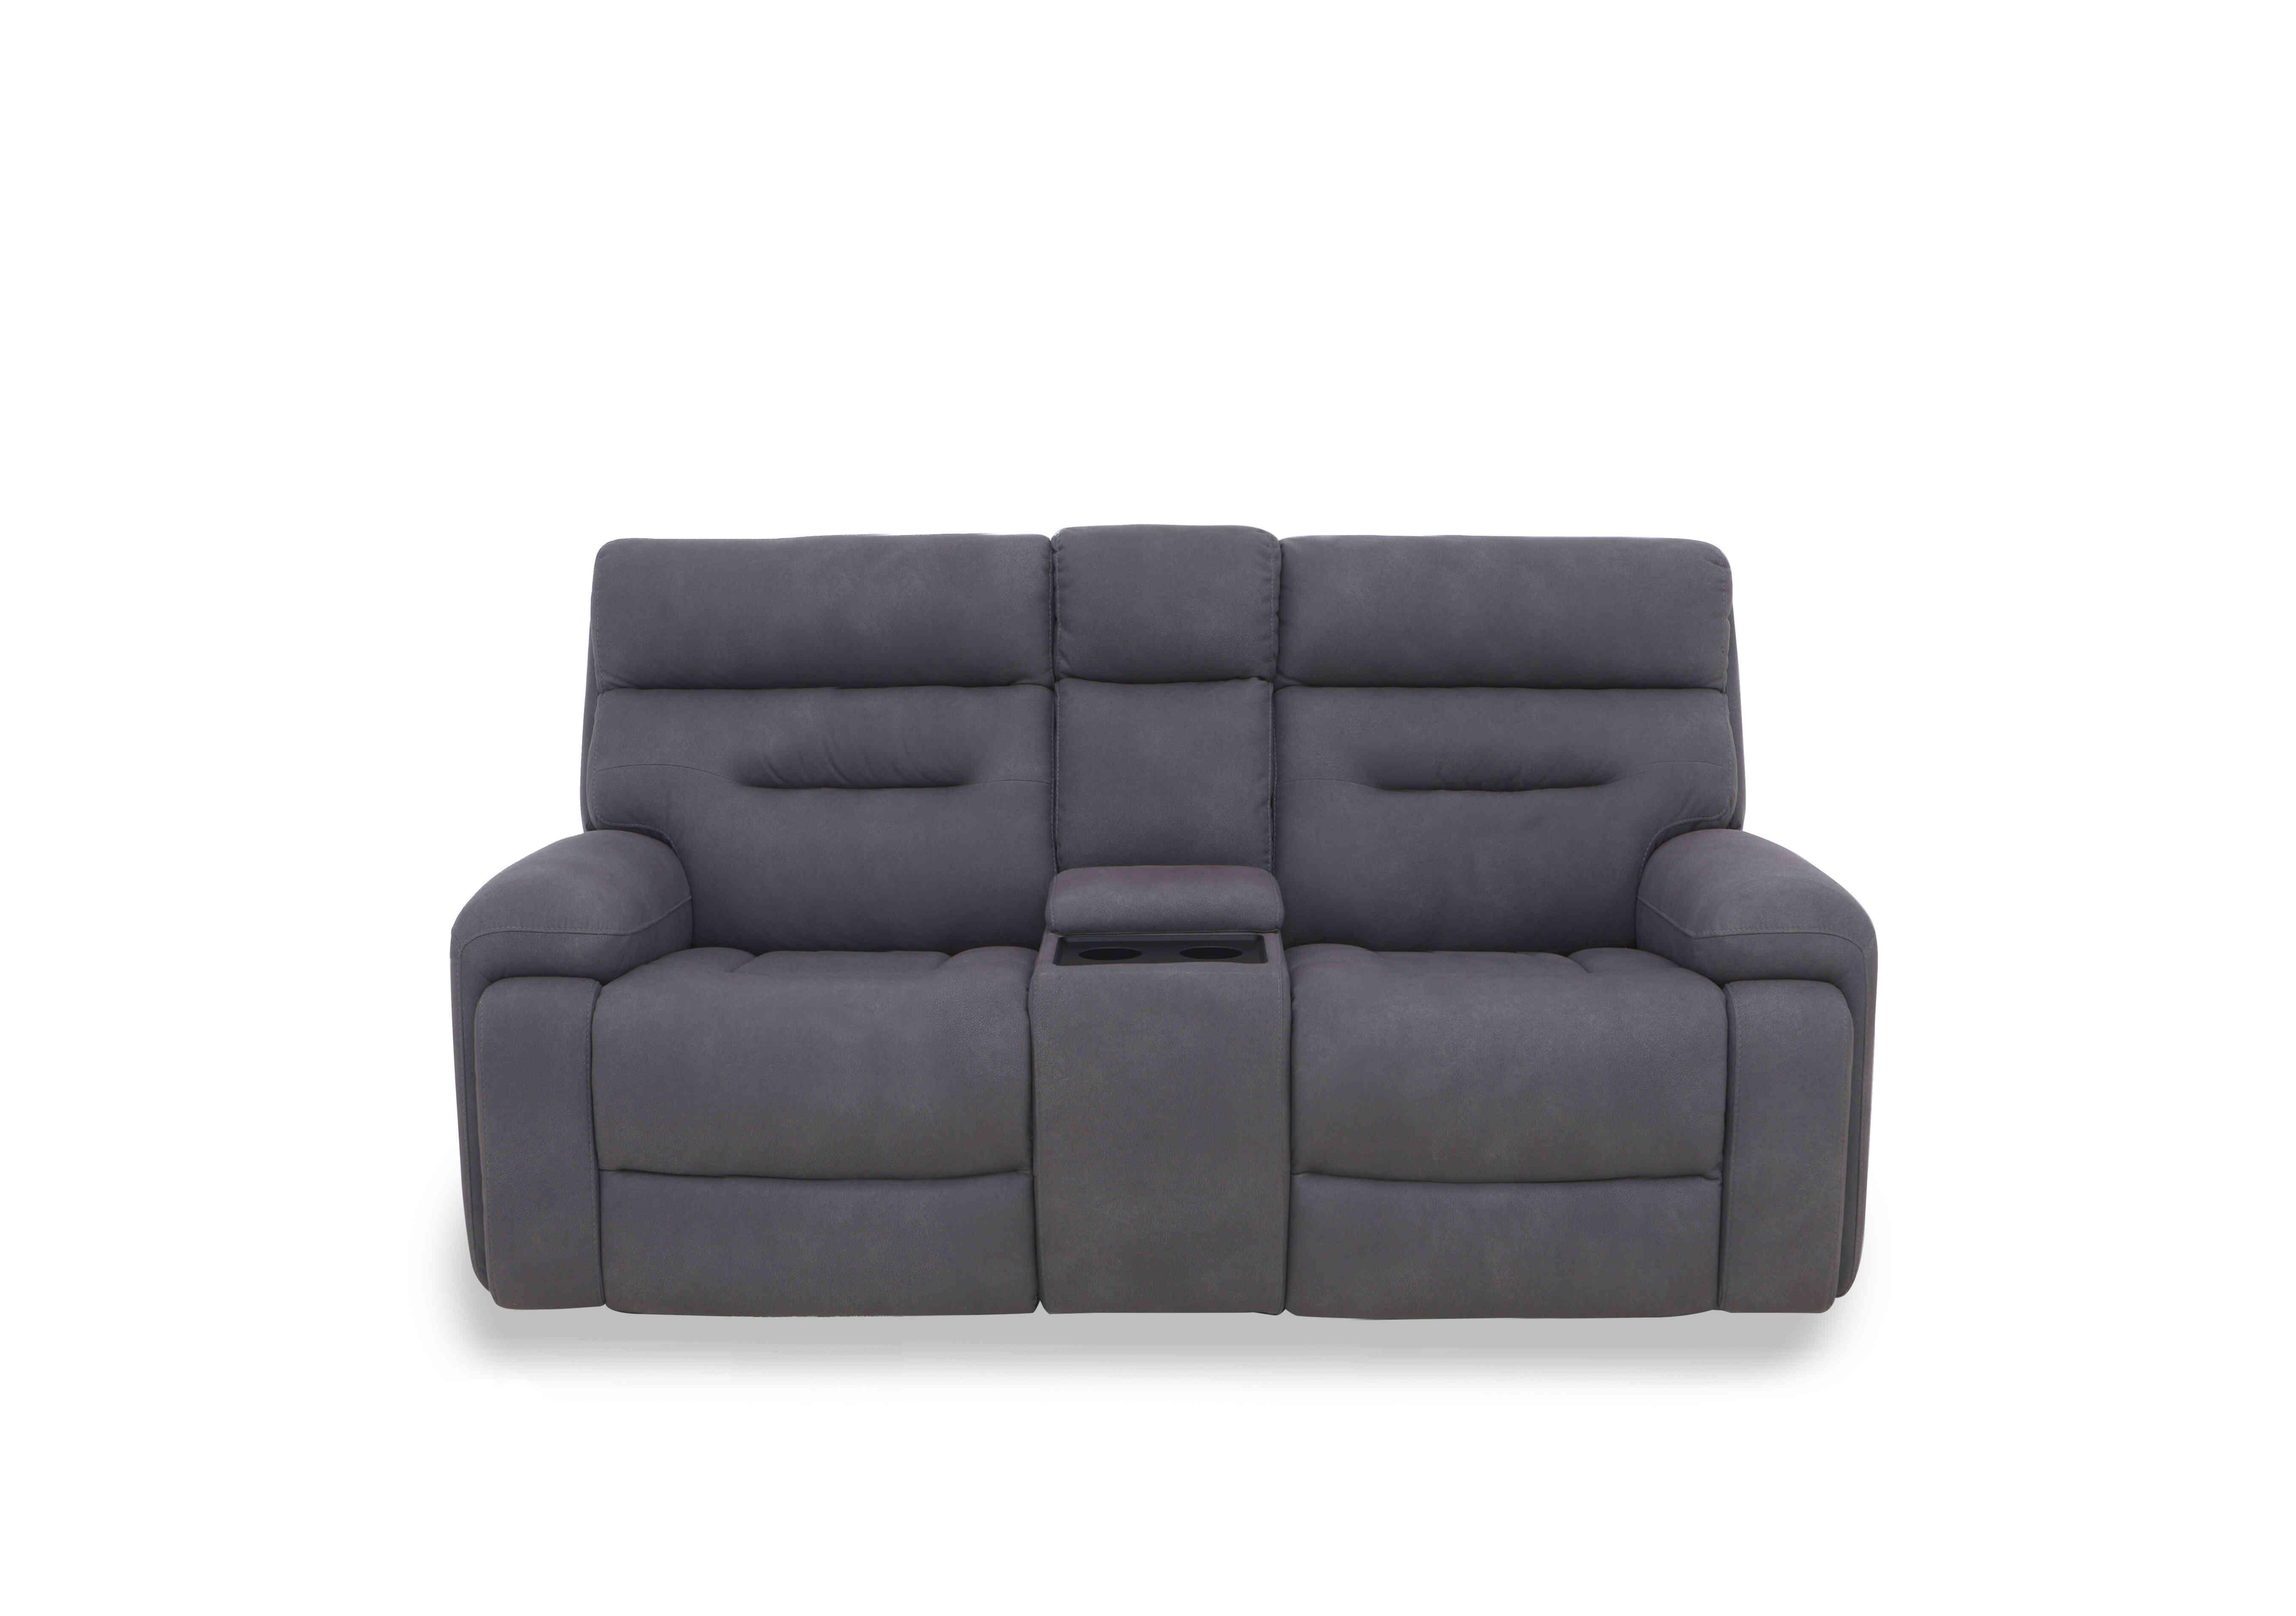 Cinemax Media 2 Seater Fabric Power Recliner Sofa with Power Headrests in Np-1107 Nappa Grey on Furniture Village